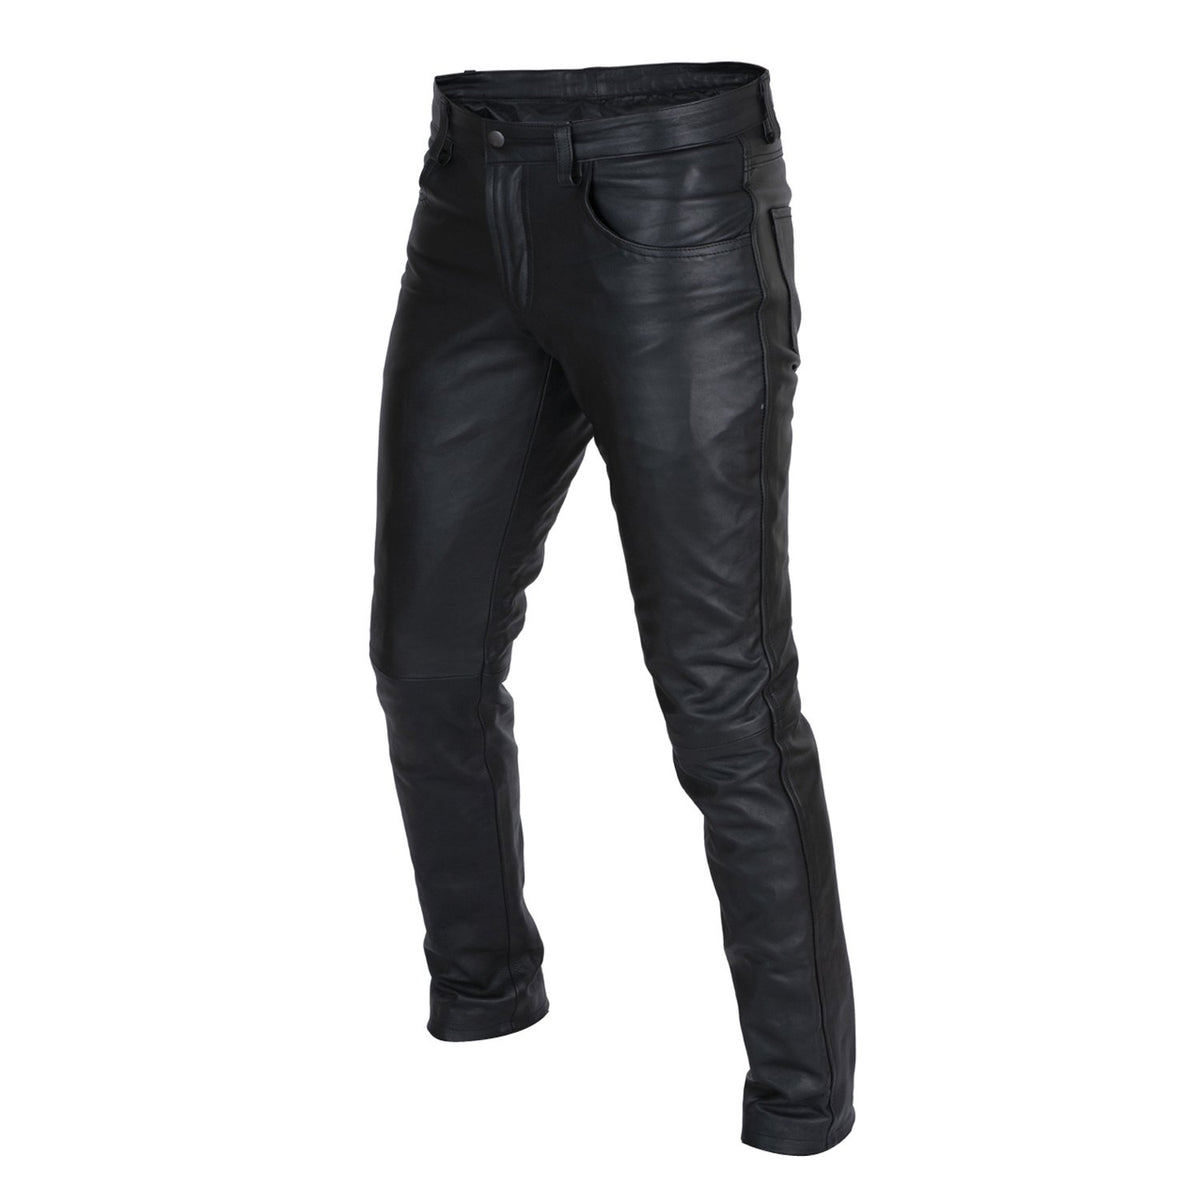 Stylish Leather Pants for Men